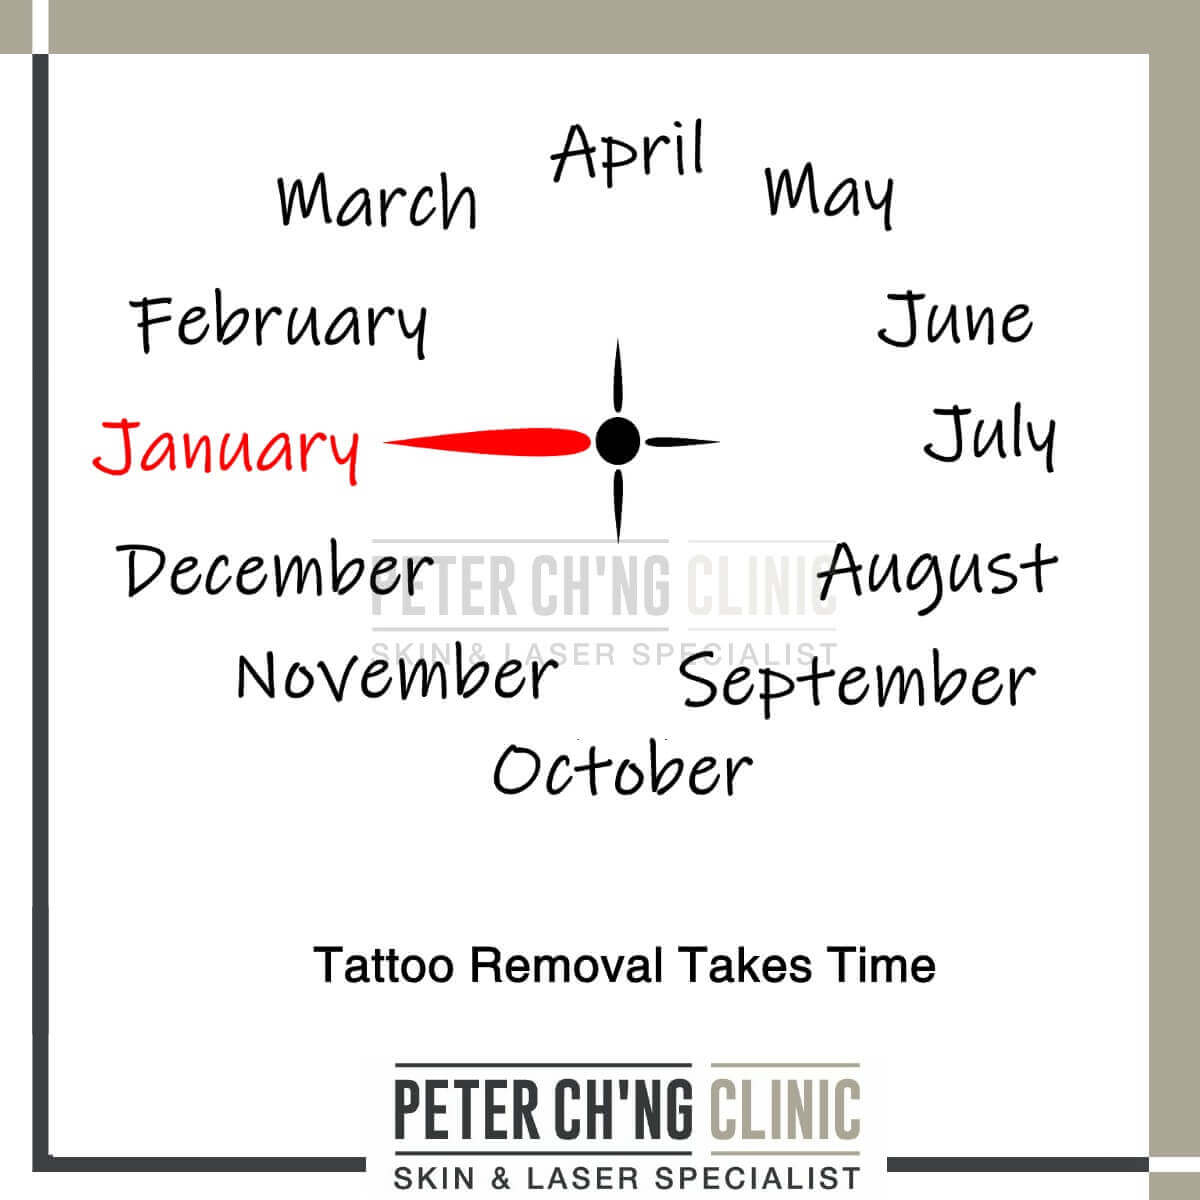 Tattoo removal takes time